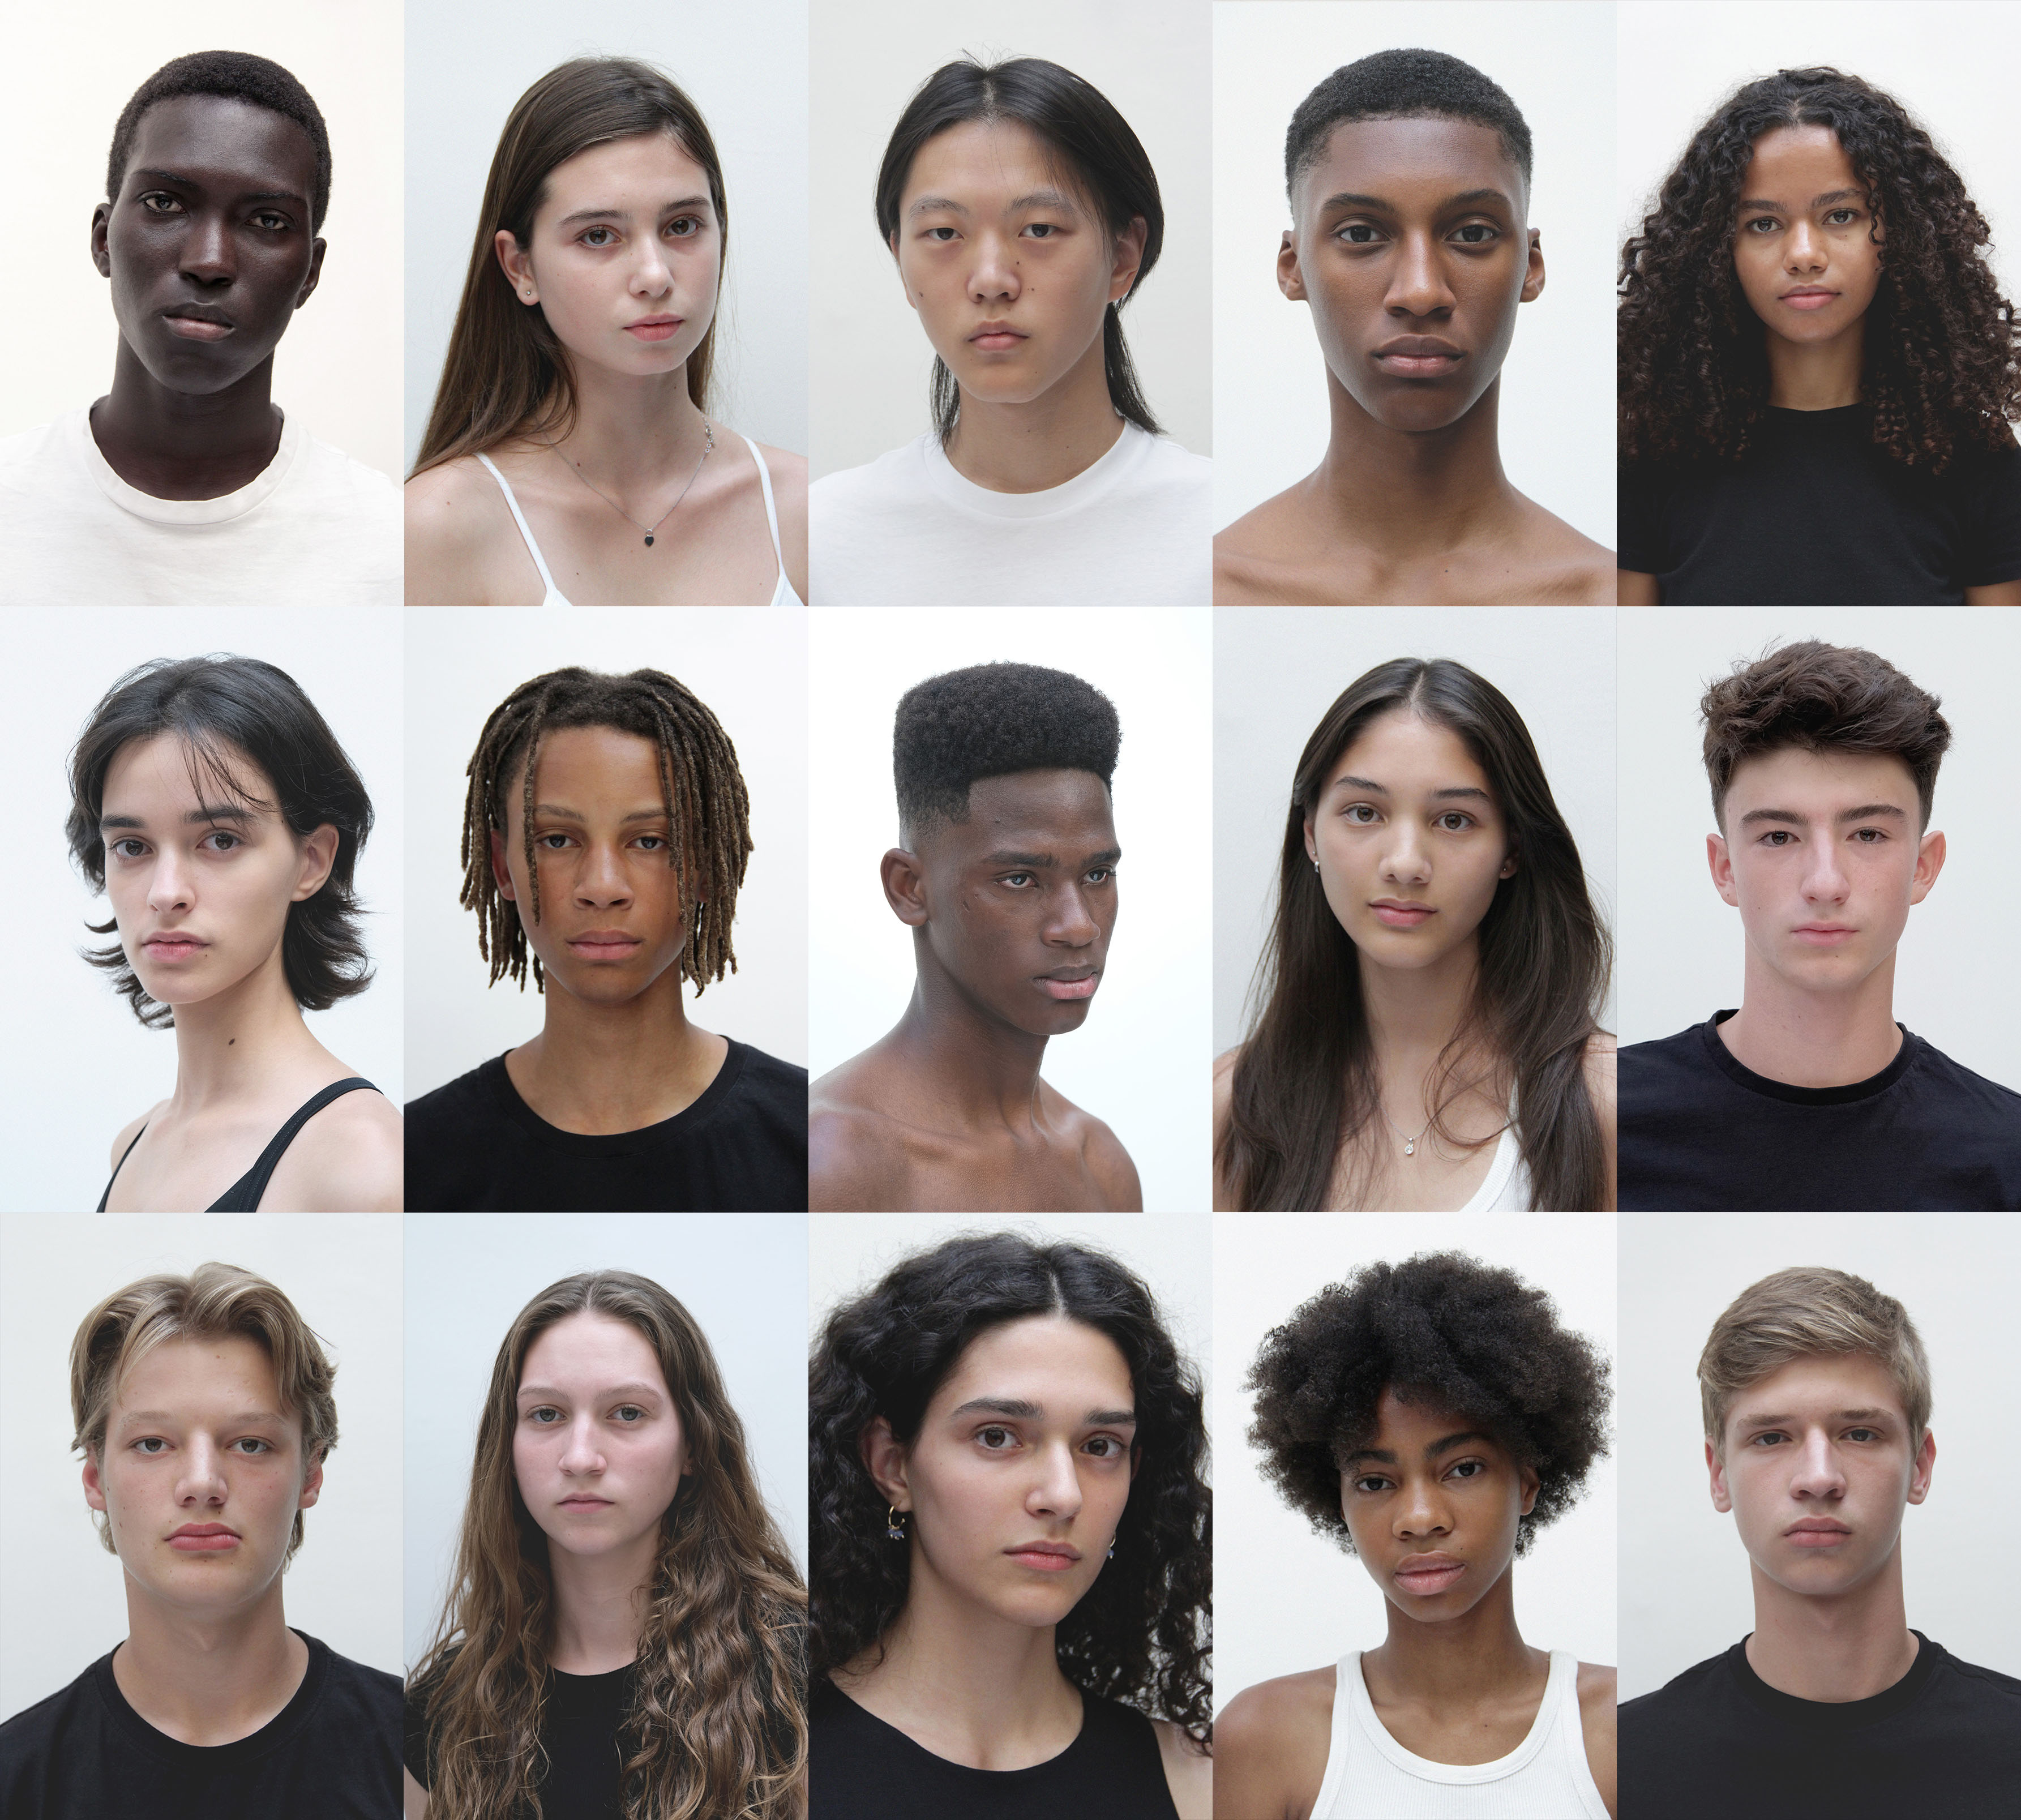 WE ARE MODELS INTRODUCES NEW FACES